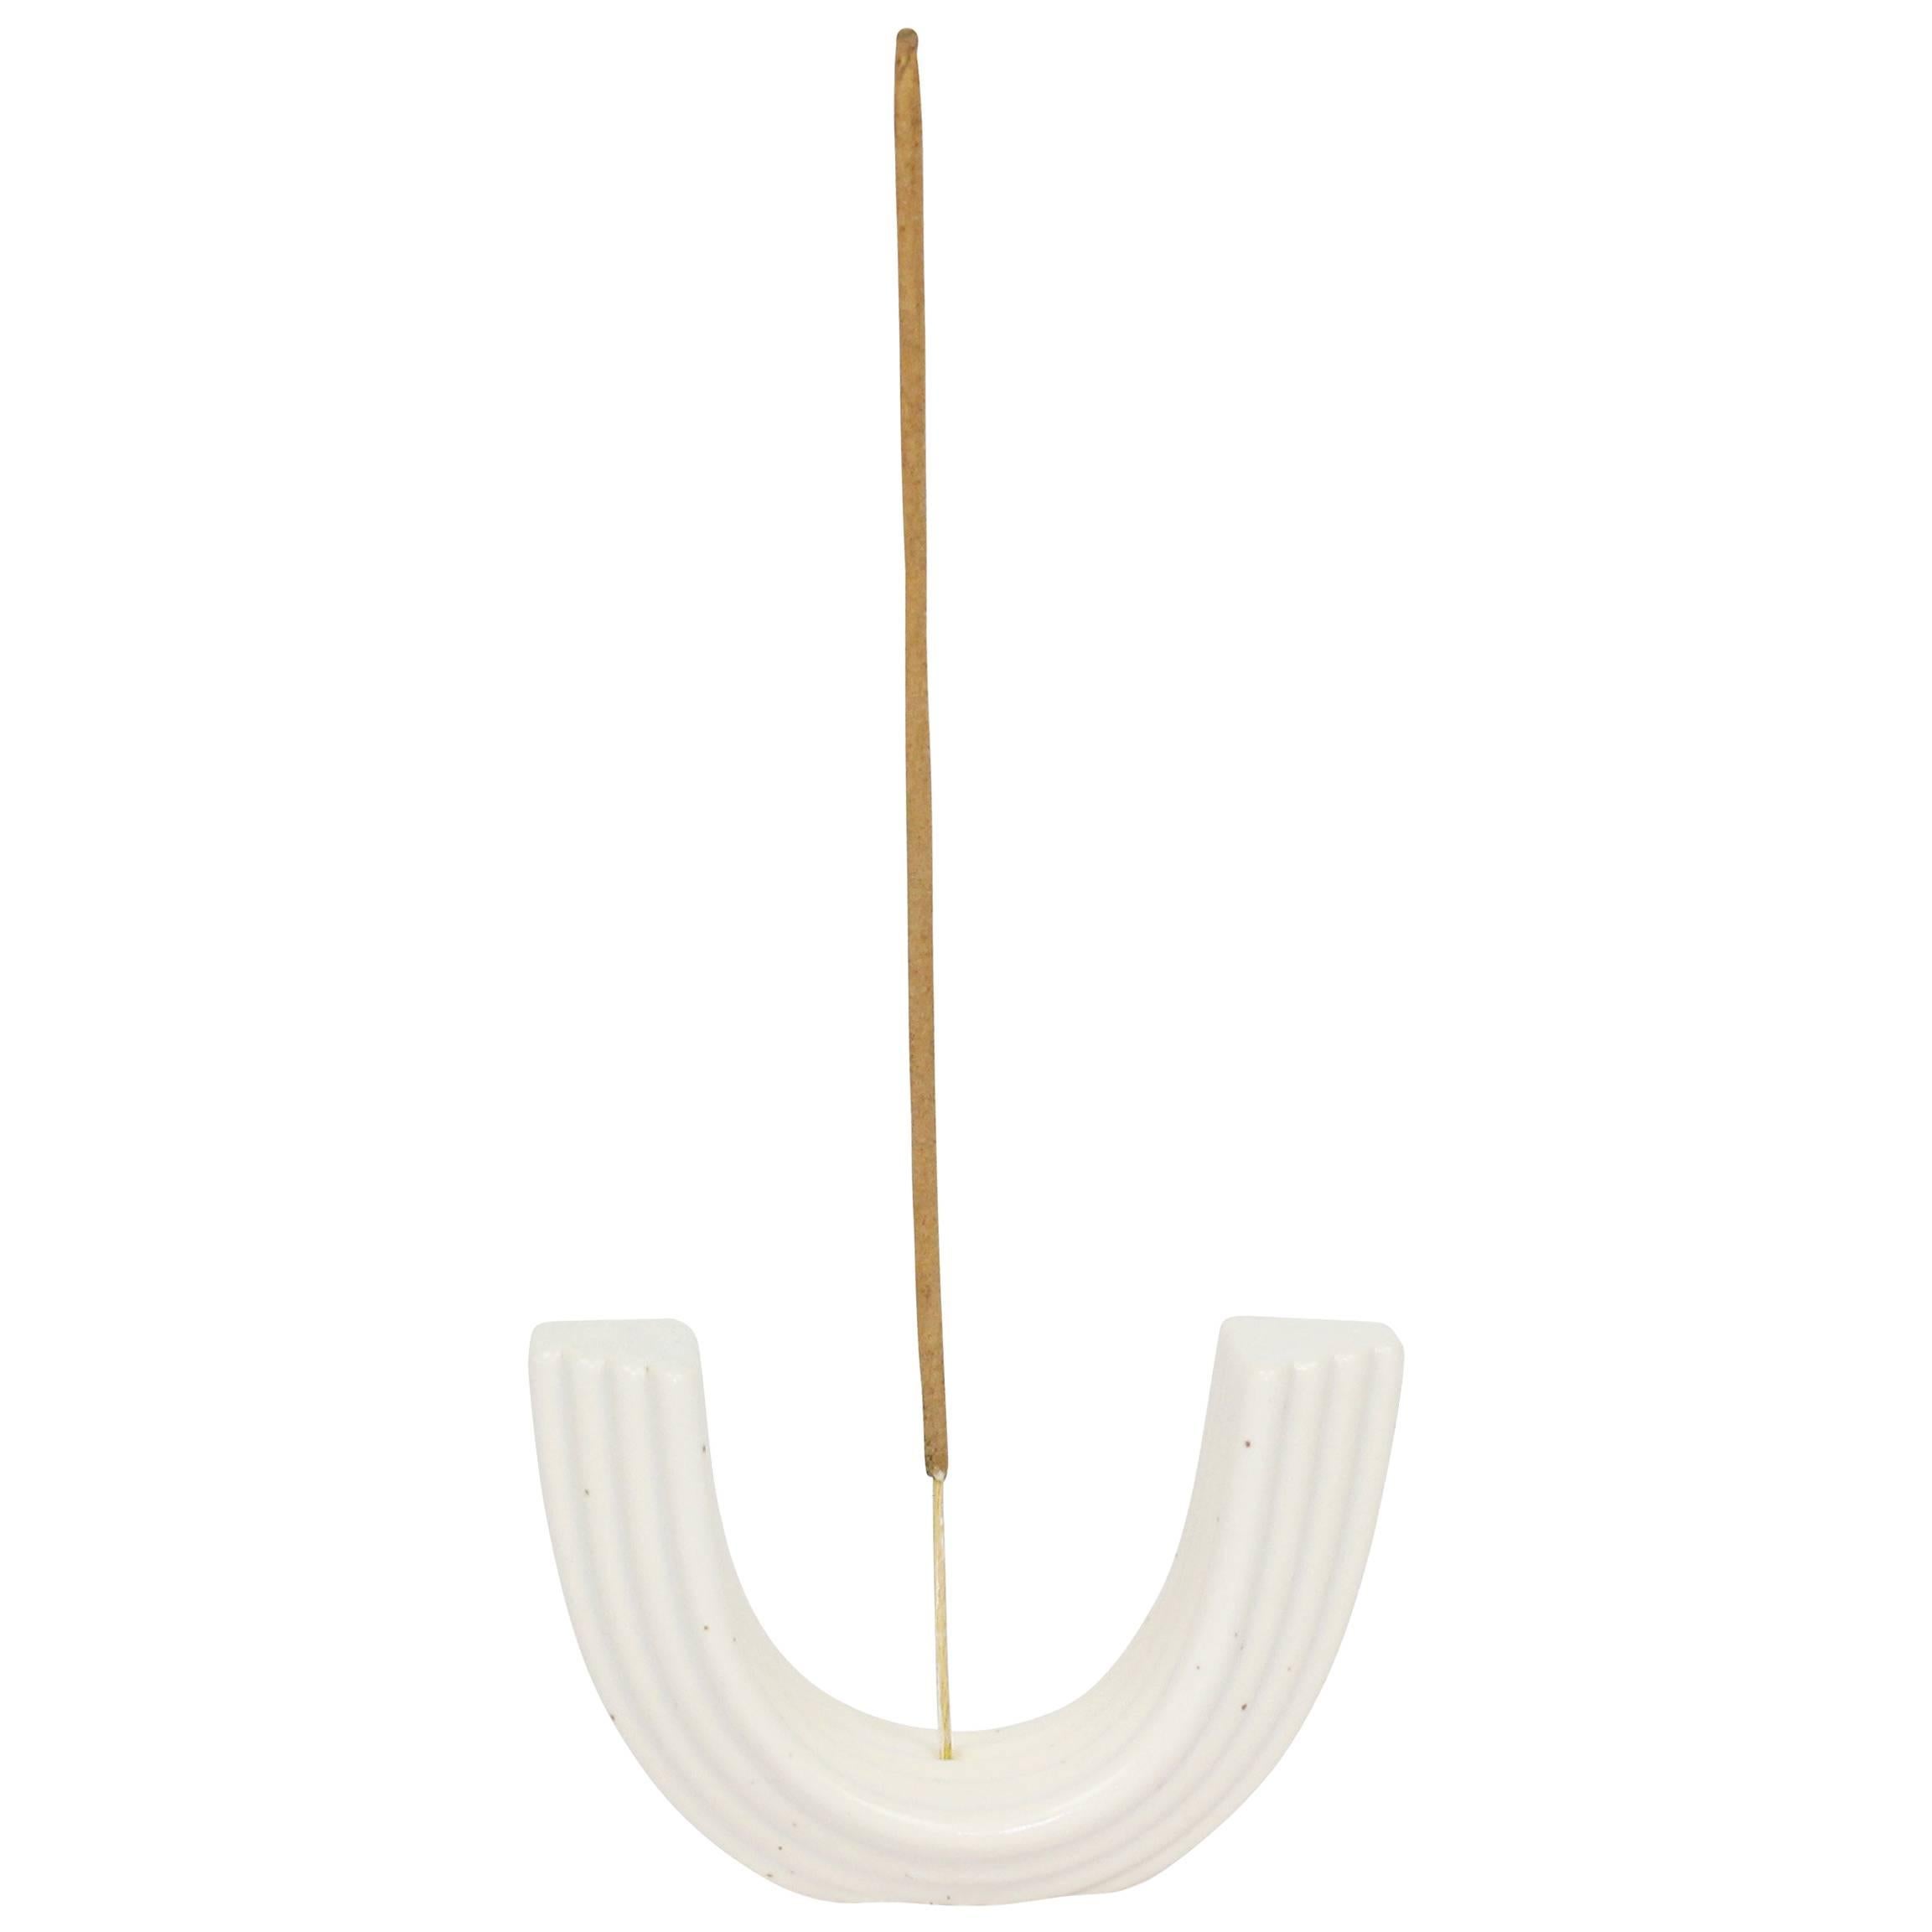 Contemporary Handmade Arch Incense Holder Tabletop-White Speckle